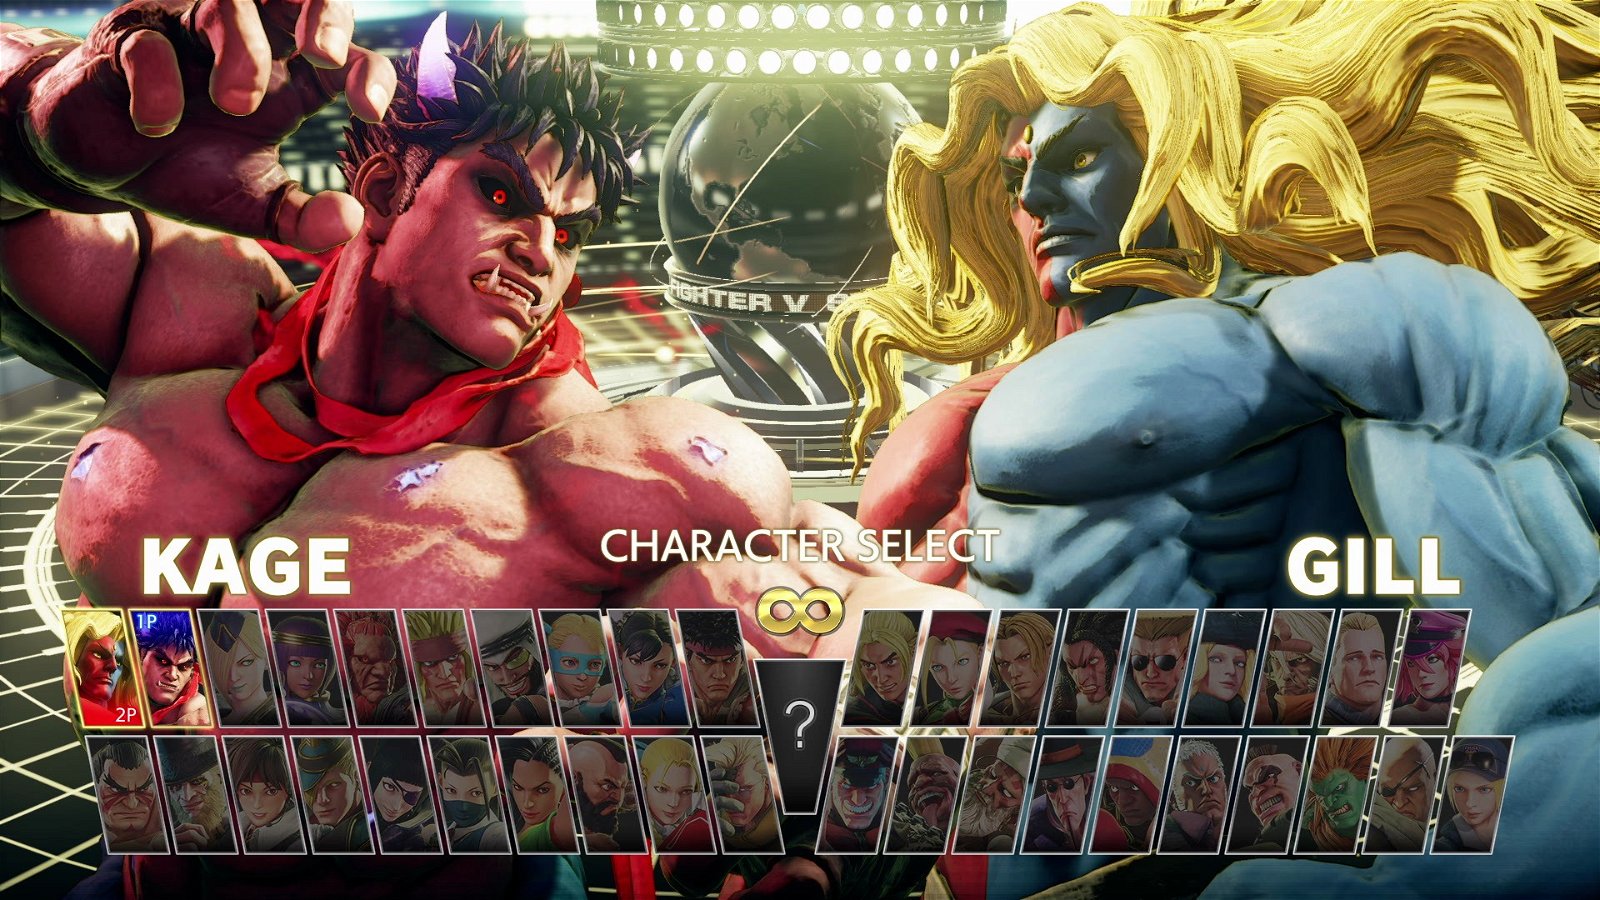 Street Fighter V: Champion Edition, Street Fighter V Champion Edition, Street Fighter 5 Champion Edition, Street Fighter Five, PS4, PlayStation 4, Capcom, release date, gameplay, features, price, pre-order, US, North America, West